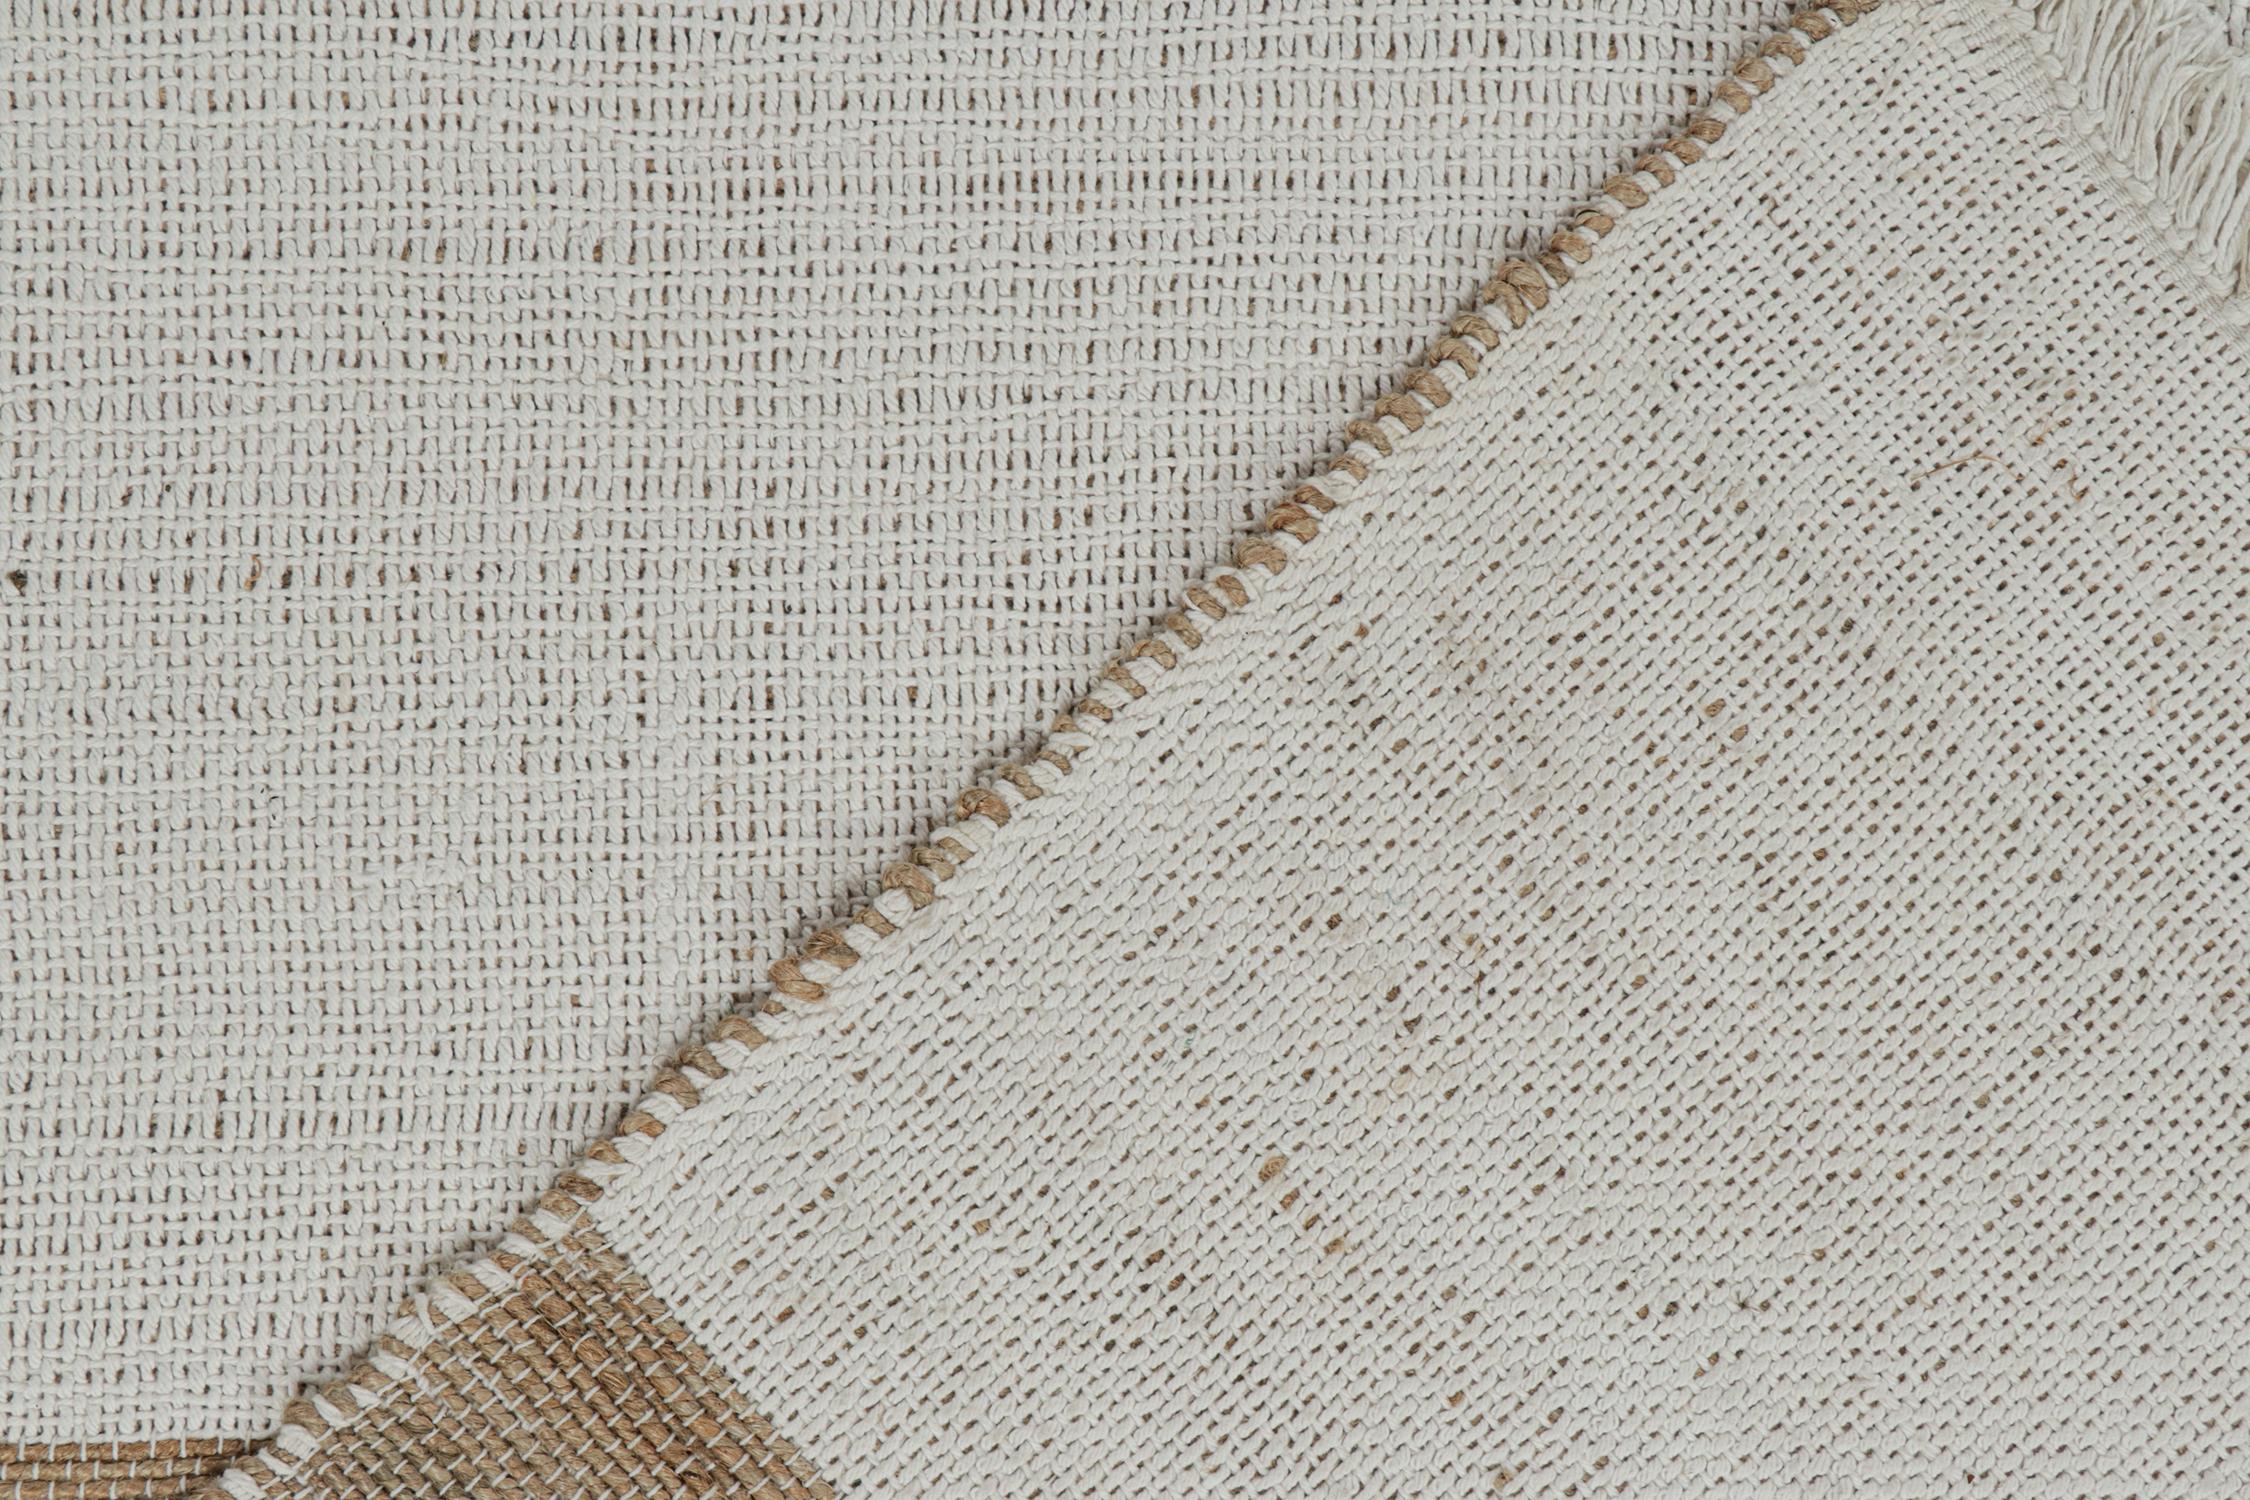 Cotton Rug & Kilim’s Contemporary Jute Flat Weave in White and Beige-Brown Stripes For Sale